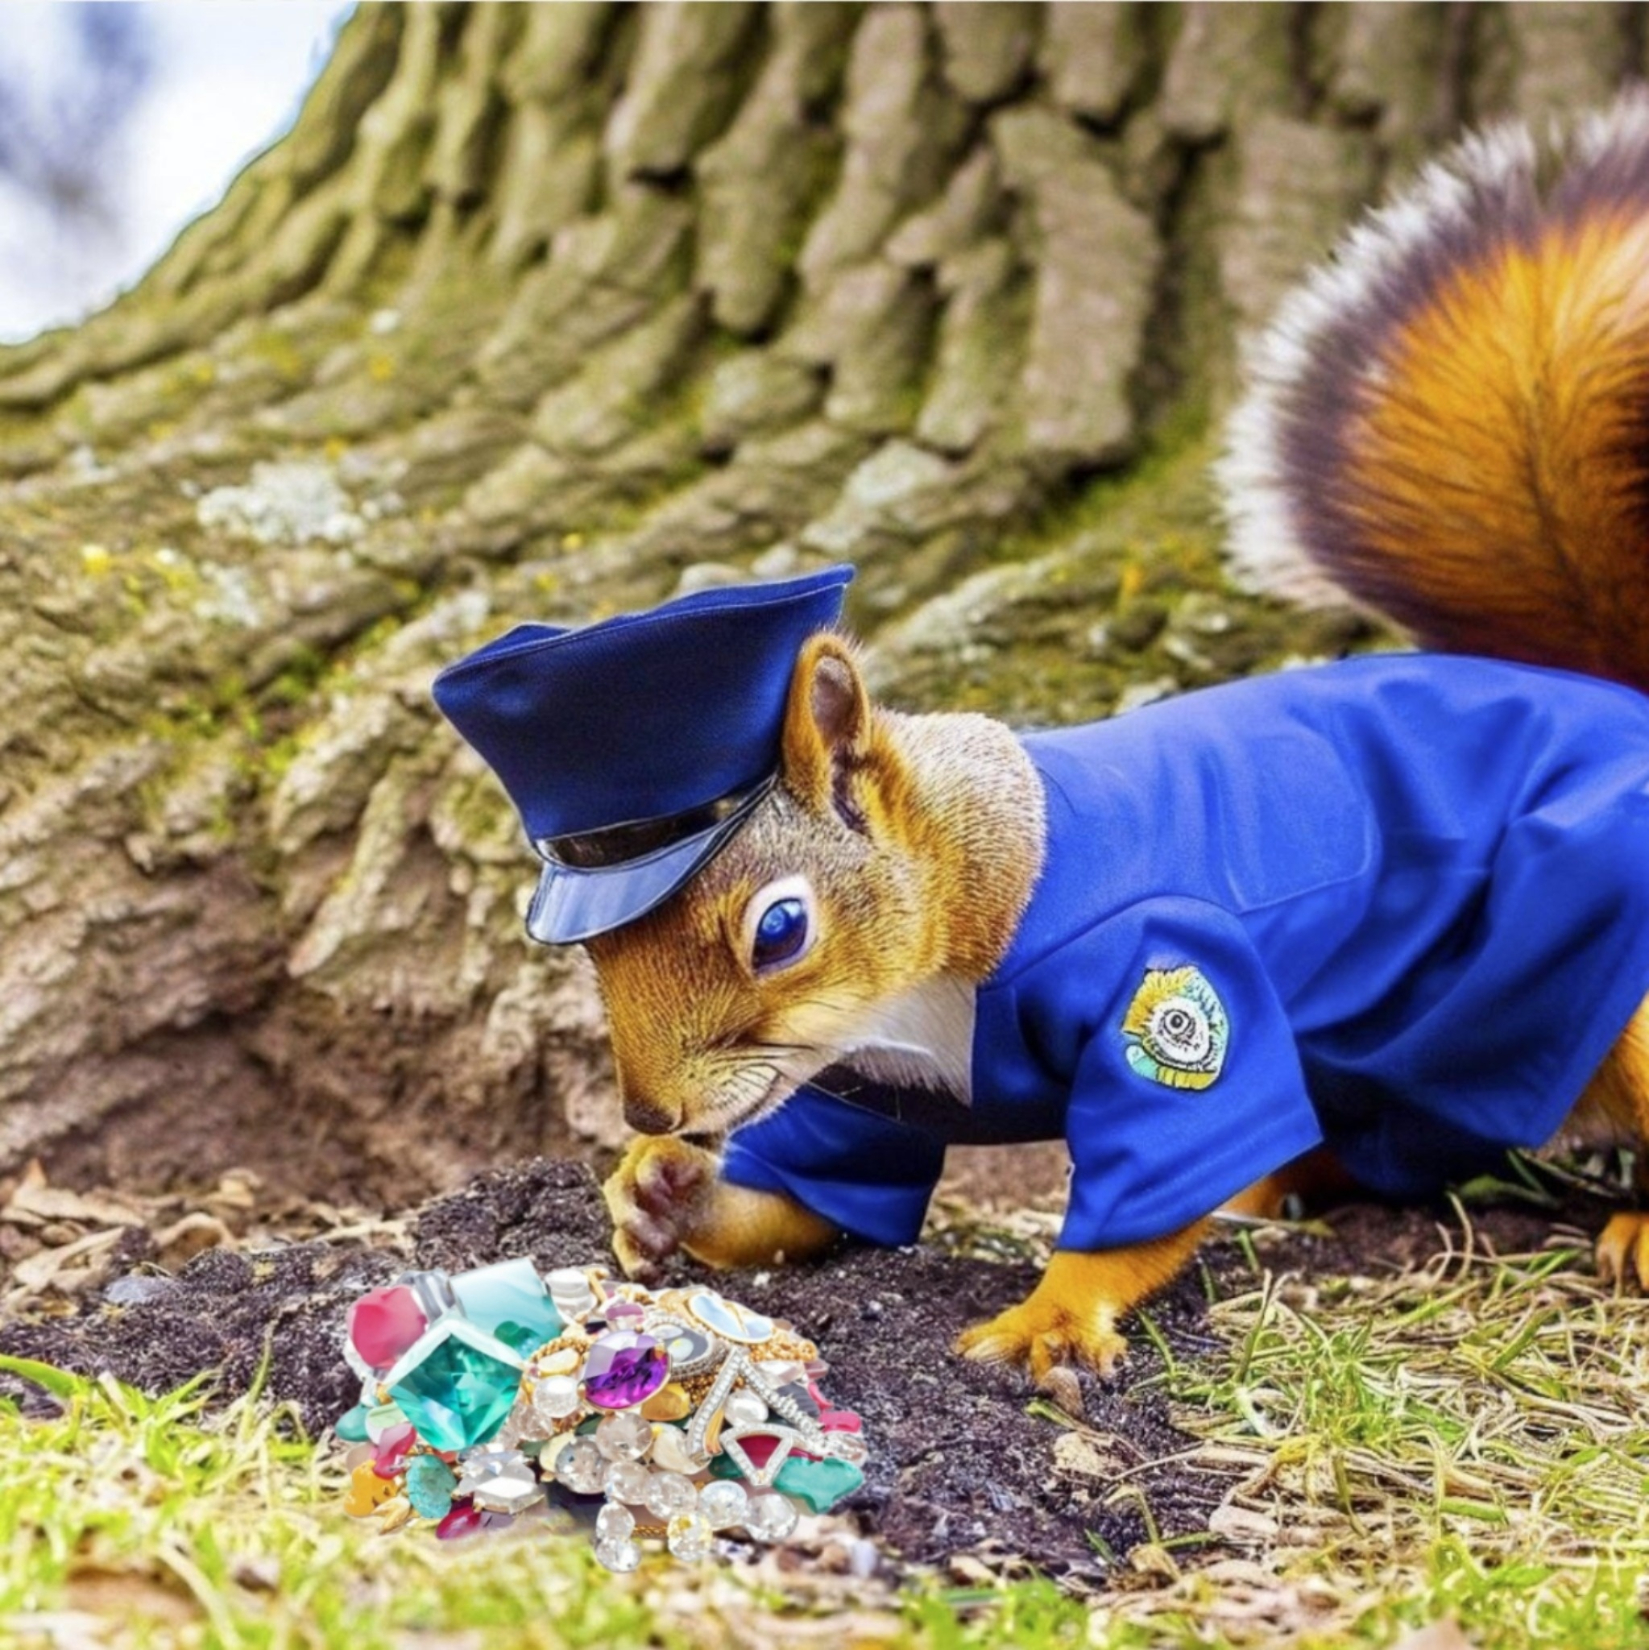 A squirrel in a police uniform digging for stolen jewels by a tree.